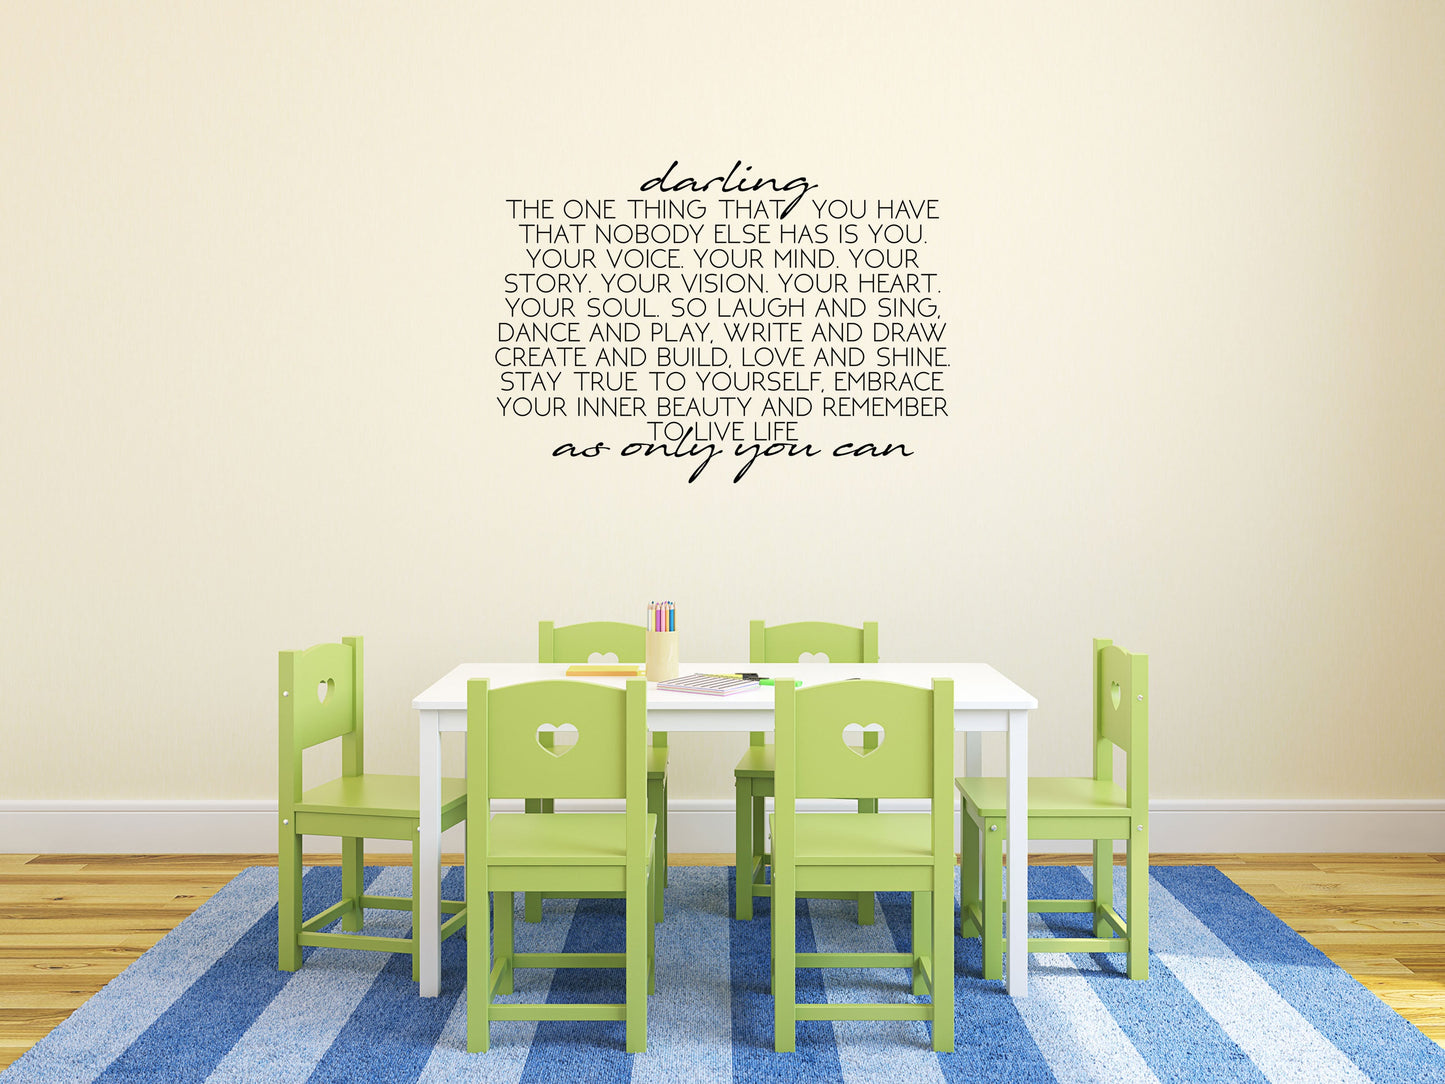 Darling Girl's Room Quote - Inspirational Wall Decals Vinyl Wall Decal Inspirational Wall Signs 